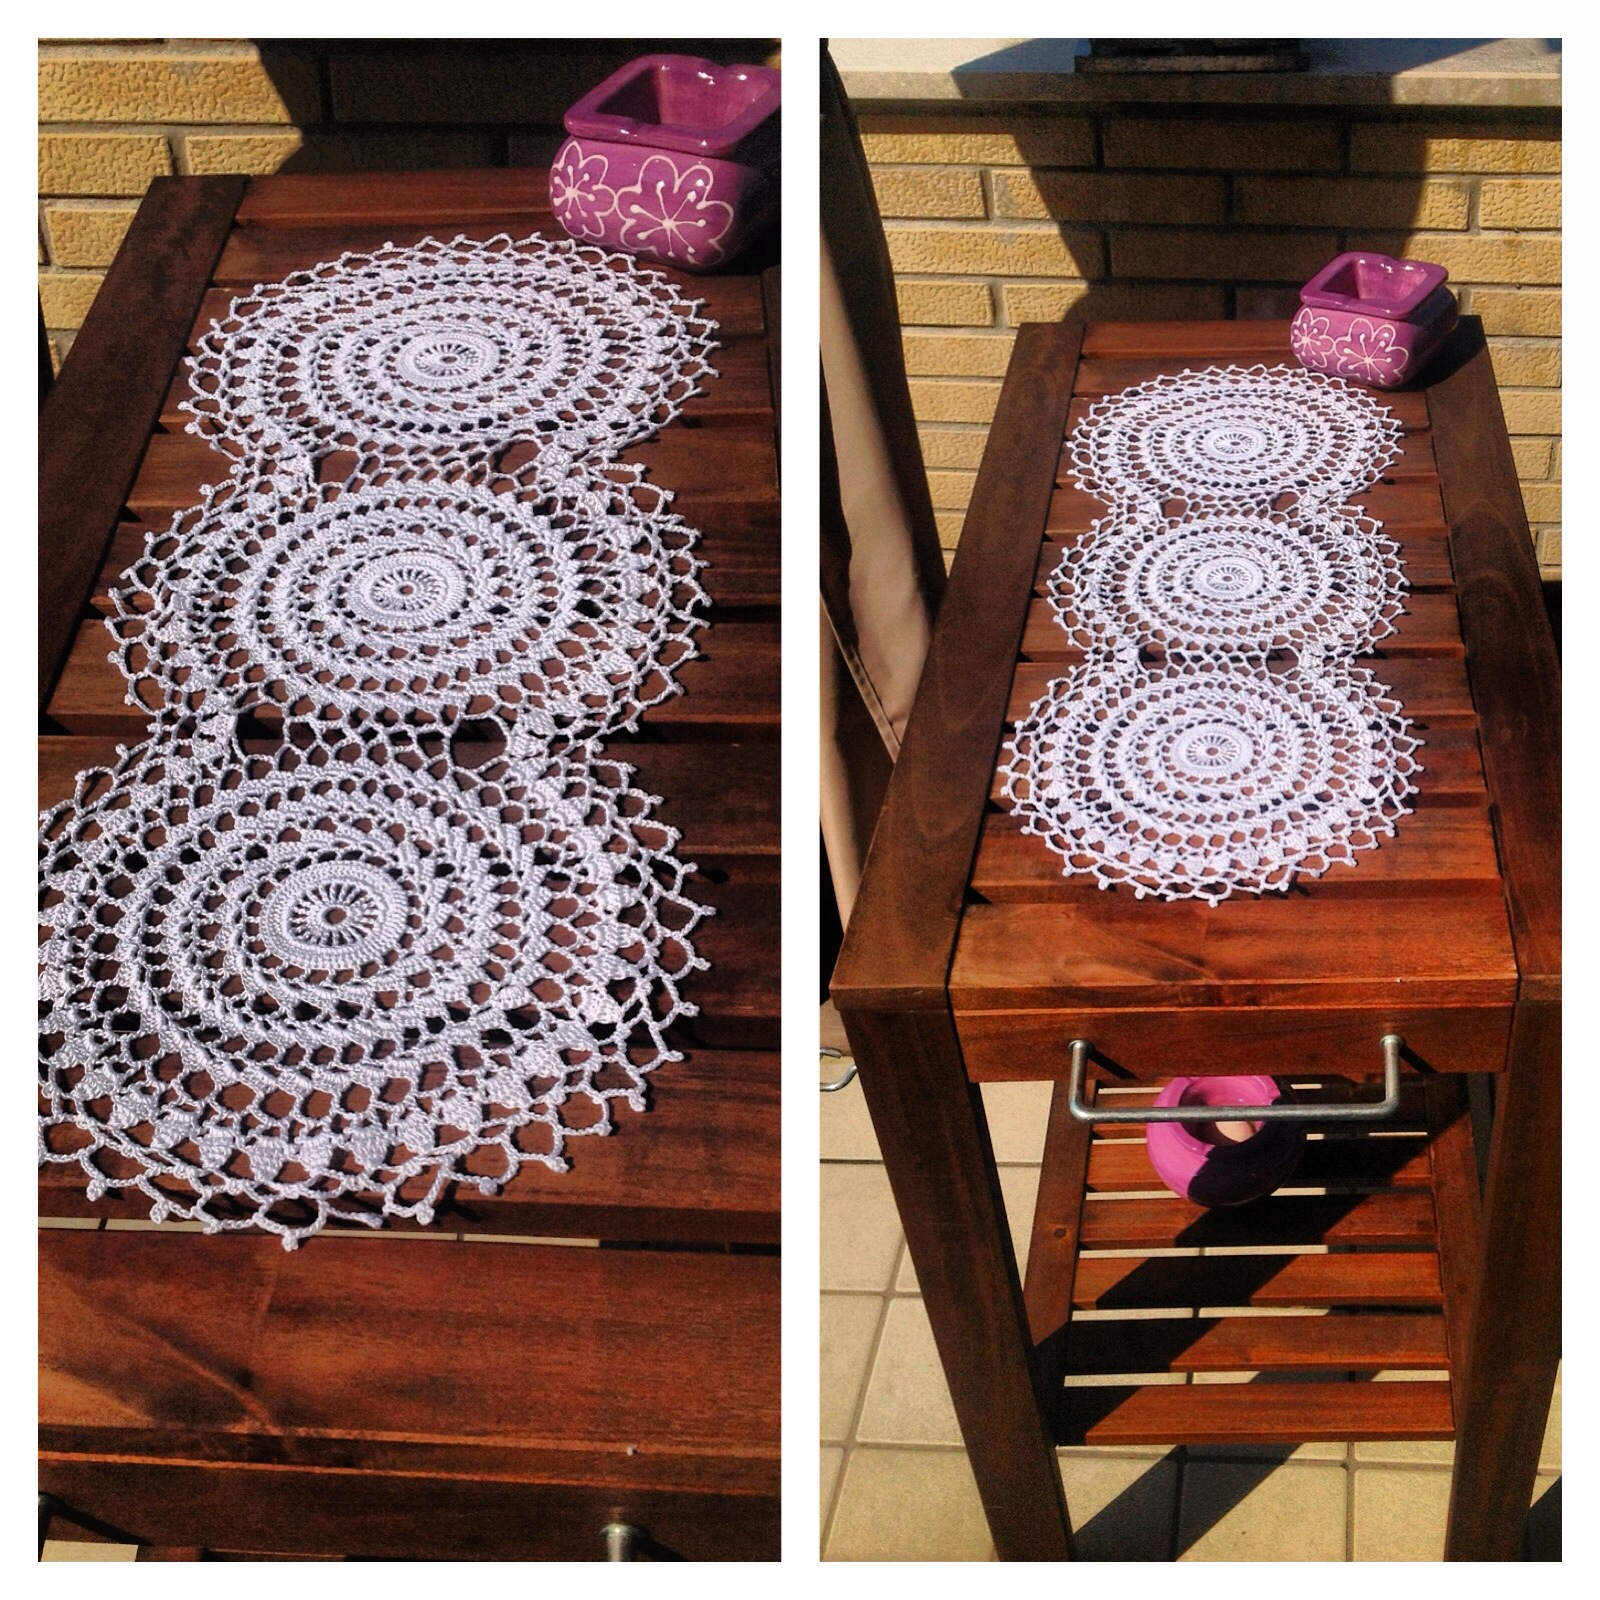 32-free-crochet-table-runner-patterns-guide-patterns